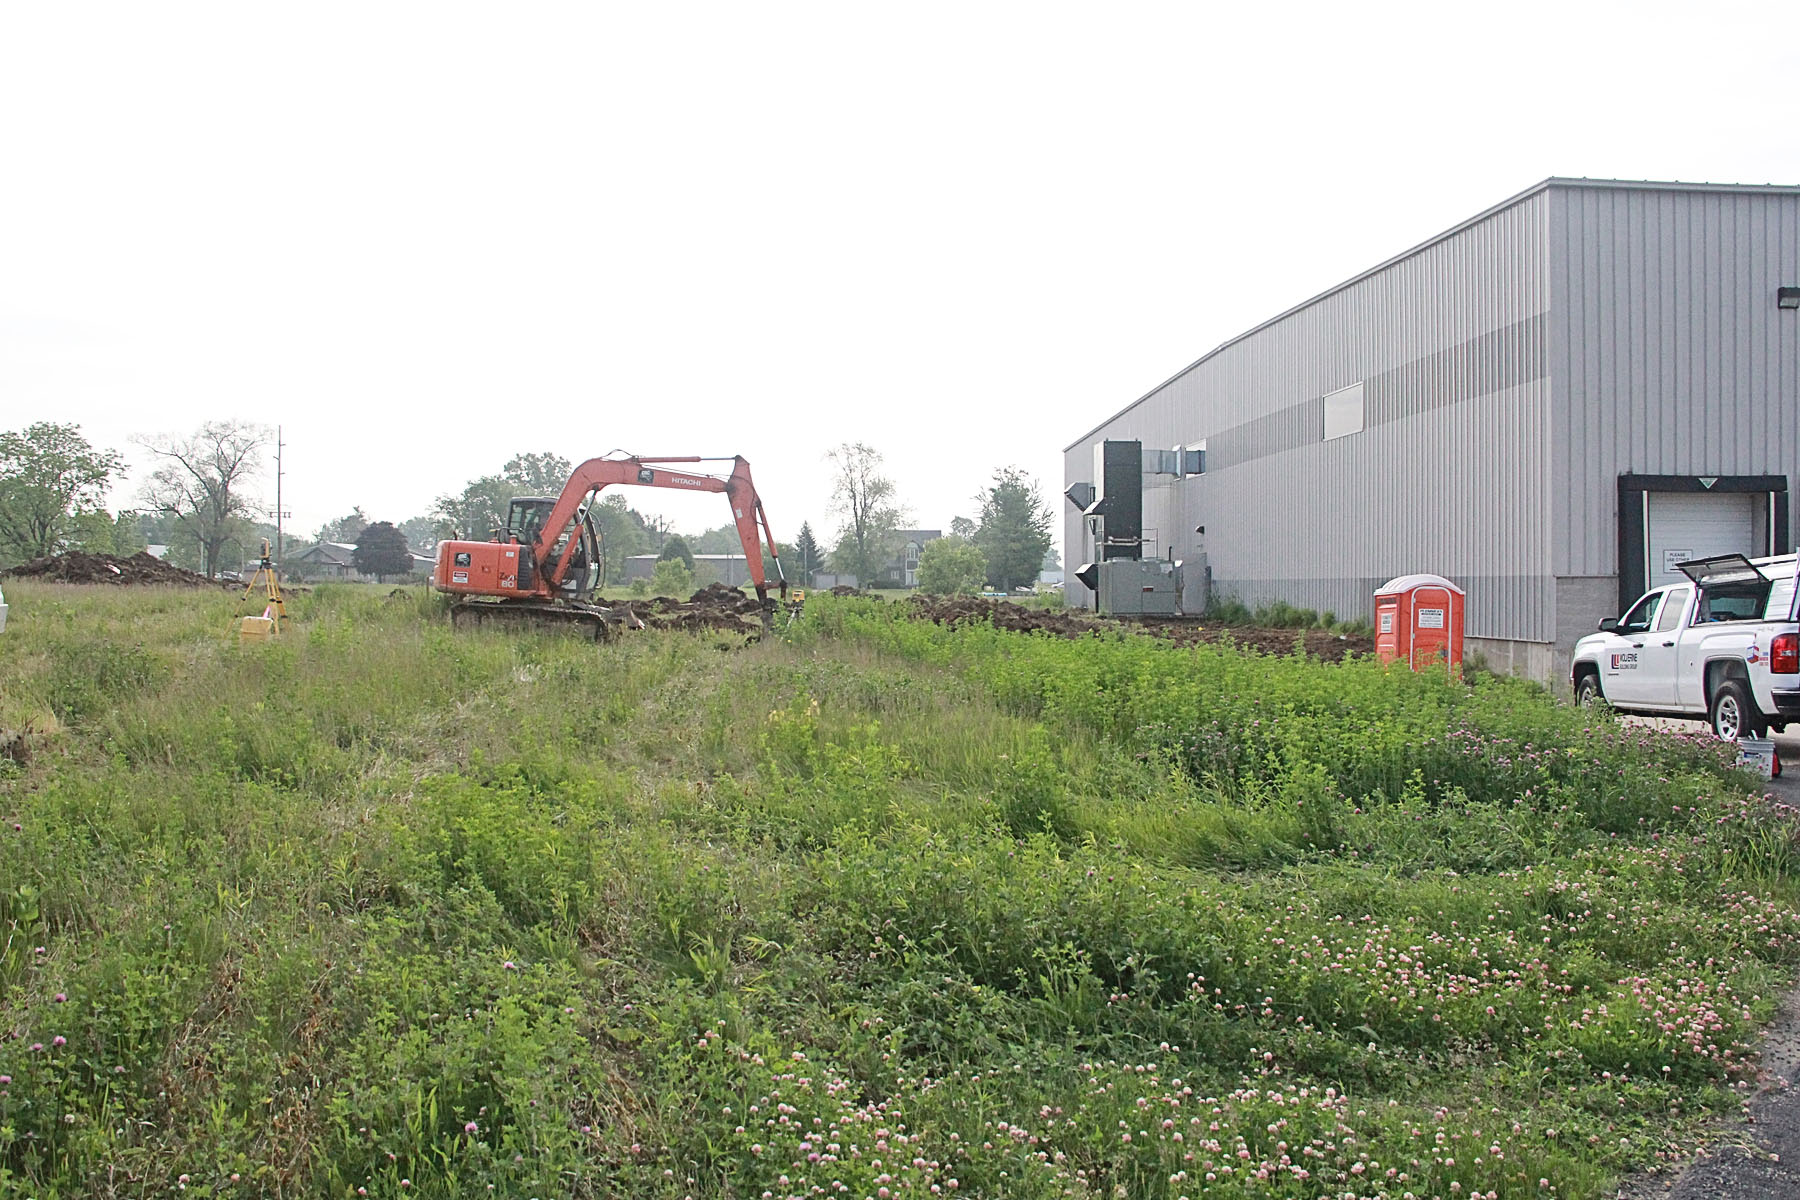 A look at when the company first broke ground back in May of this year.